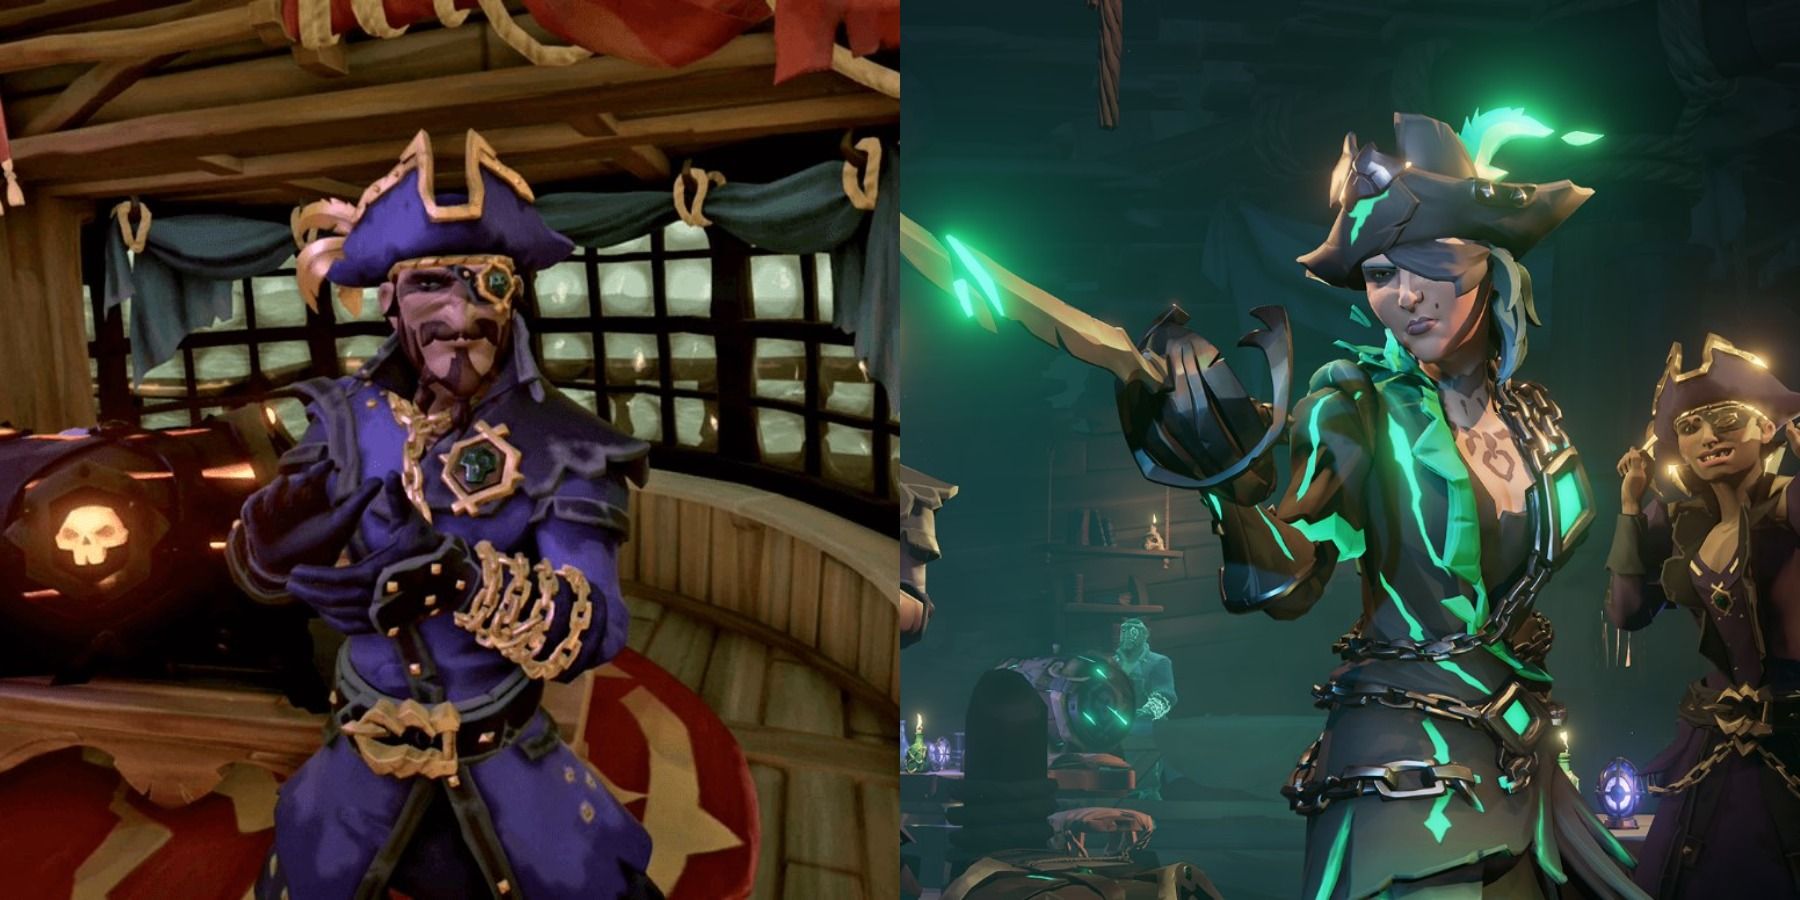 Pirate legend and ghost outfit sets